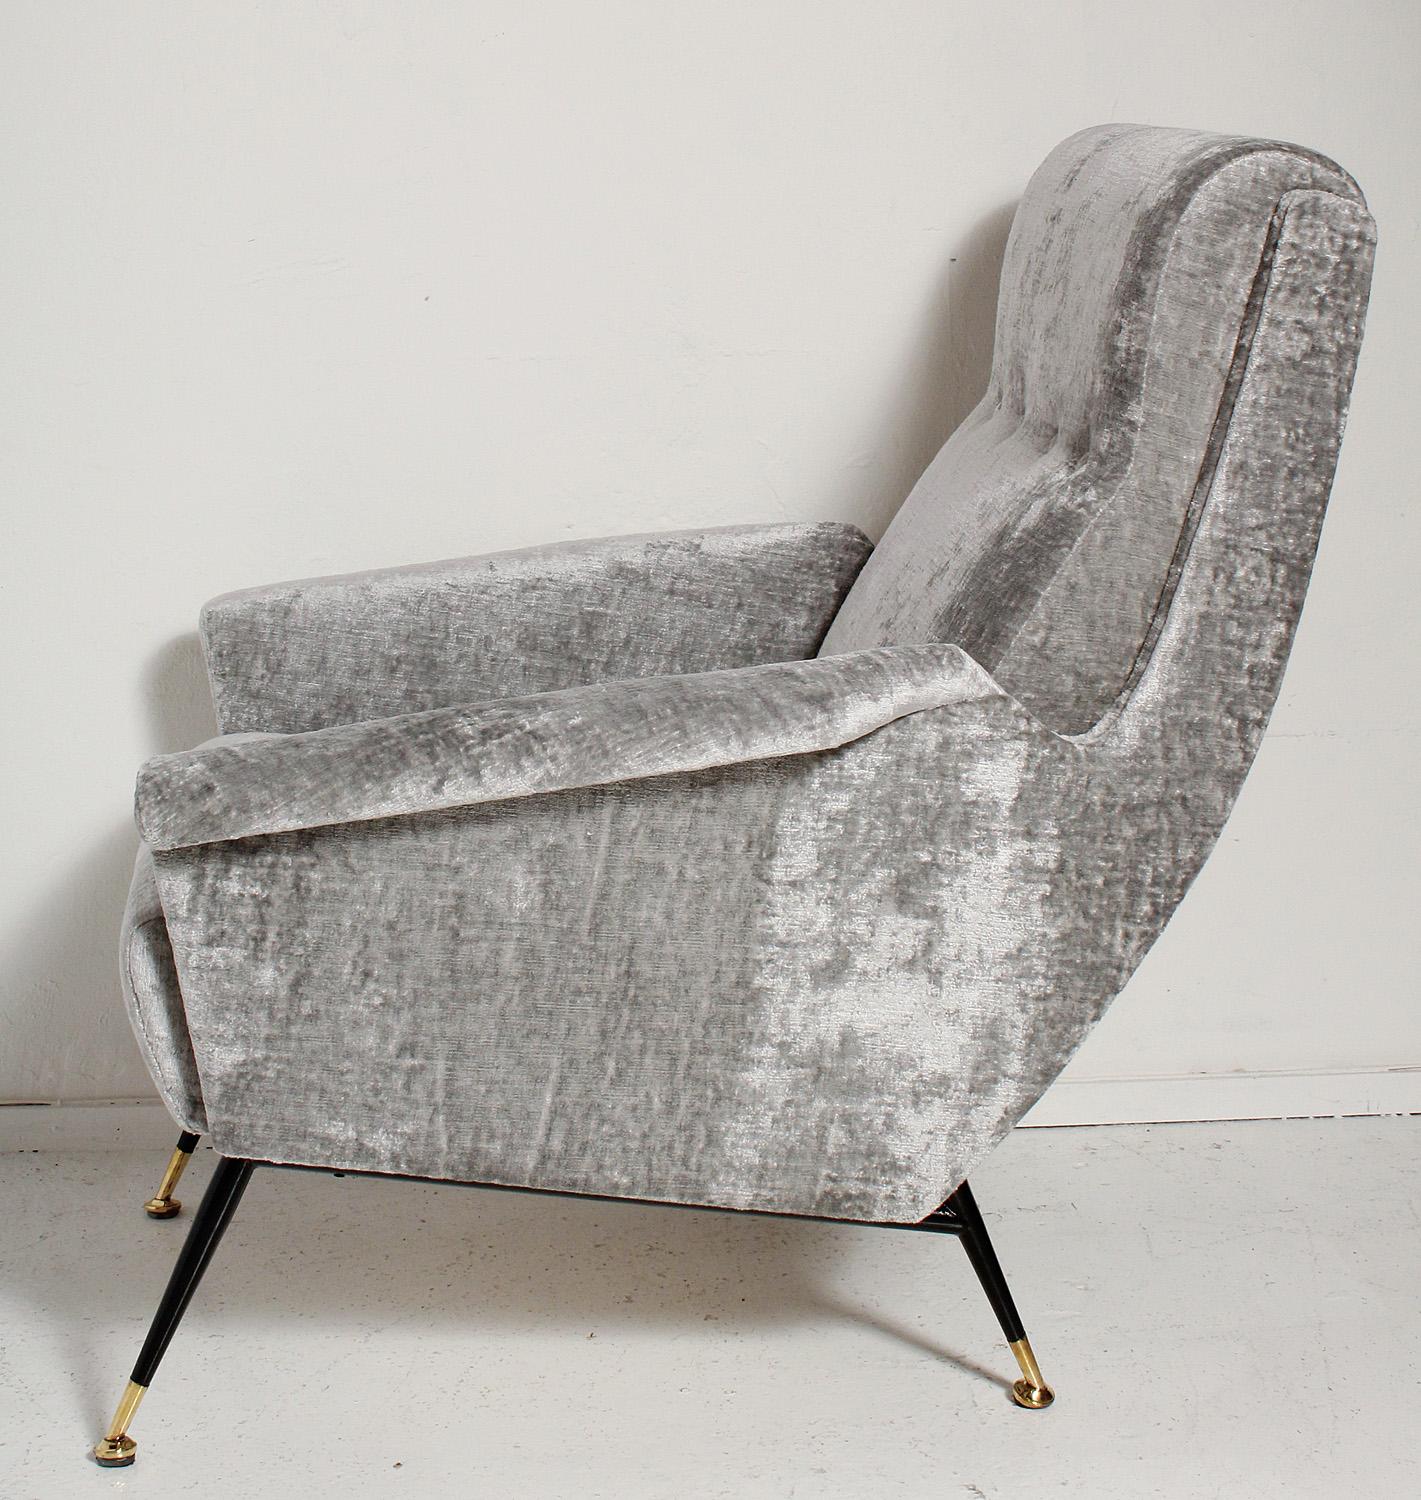 Sexy pair of fully restored 1950s Italian lounge chairs have black metal legs with solid brass sabots, and are upholstered in a luxe, richly textured, grey velvet.